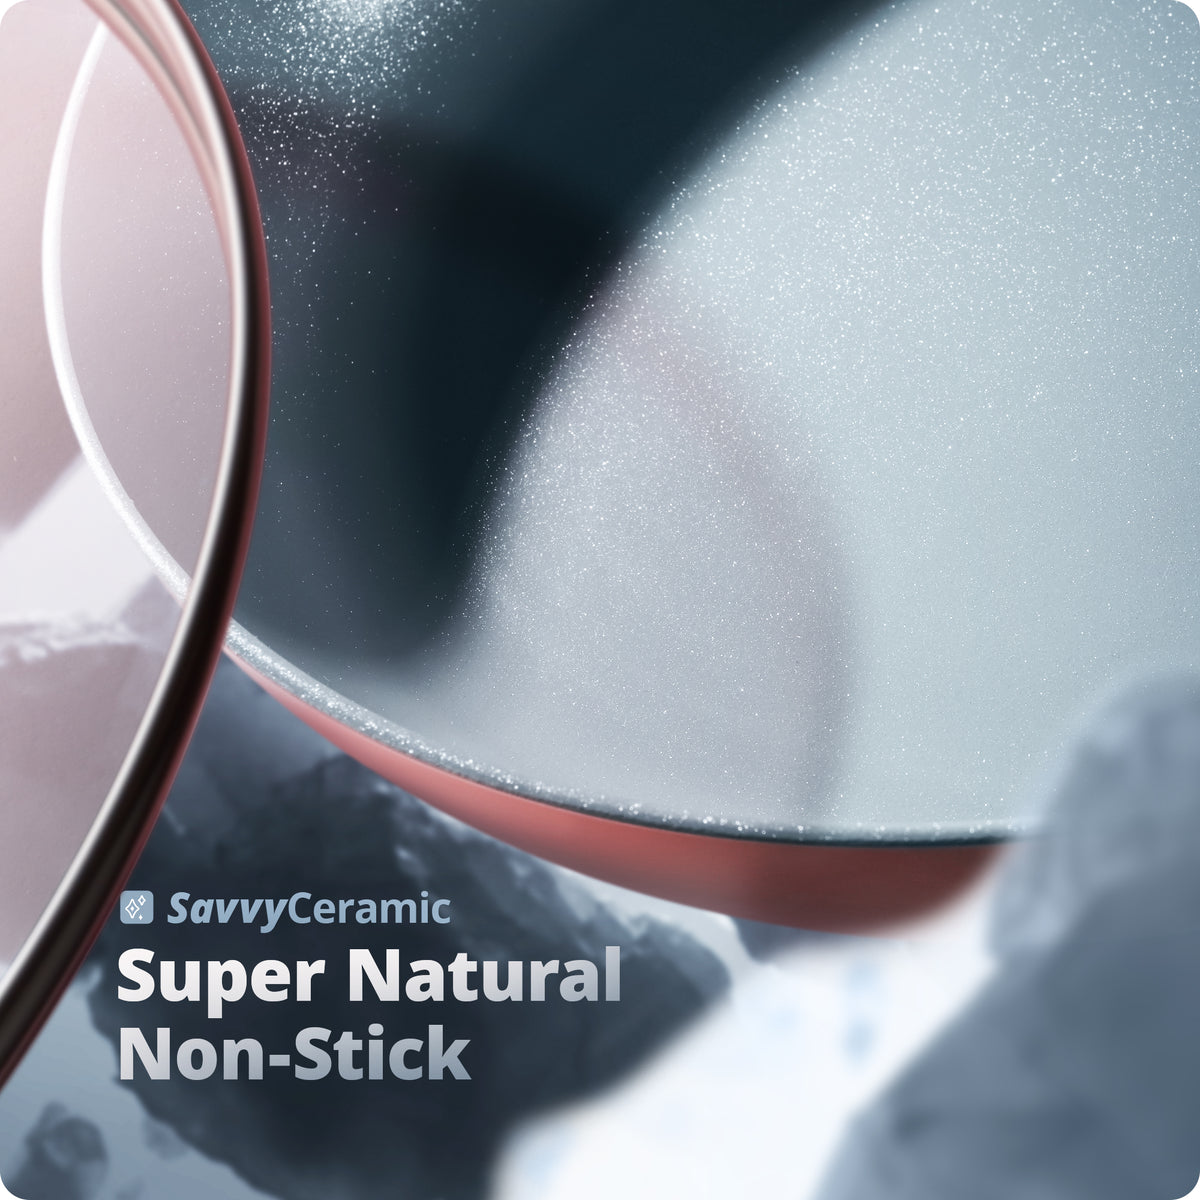 Super Natural Non-Stick: Naturally Derived Ceramic, Abnormally Slick, Easy Cleanup, Extraordinarily Built (Pink)